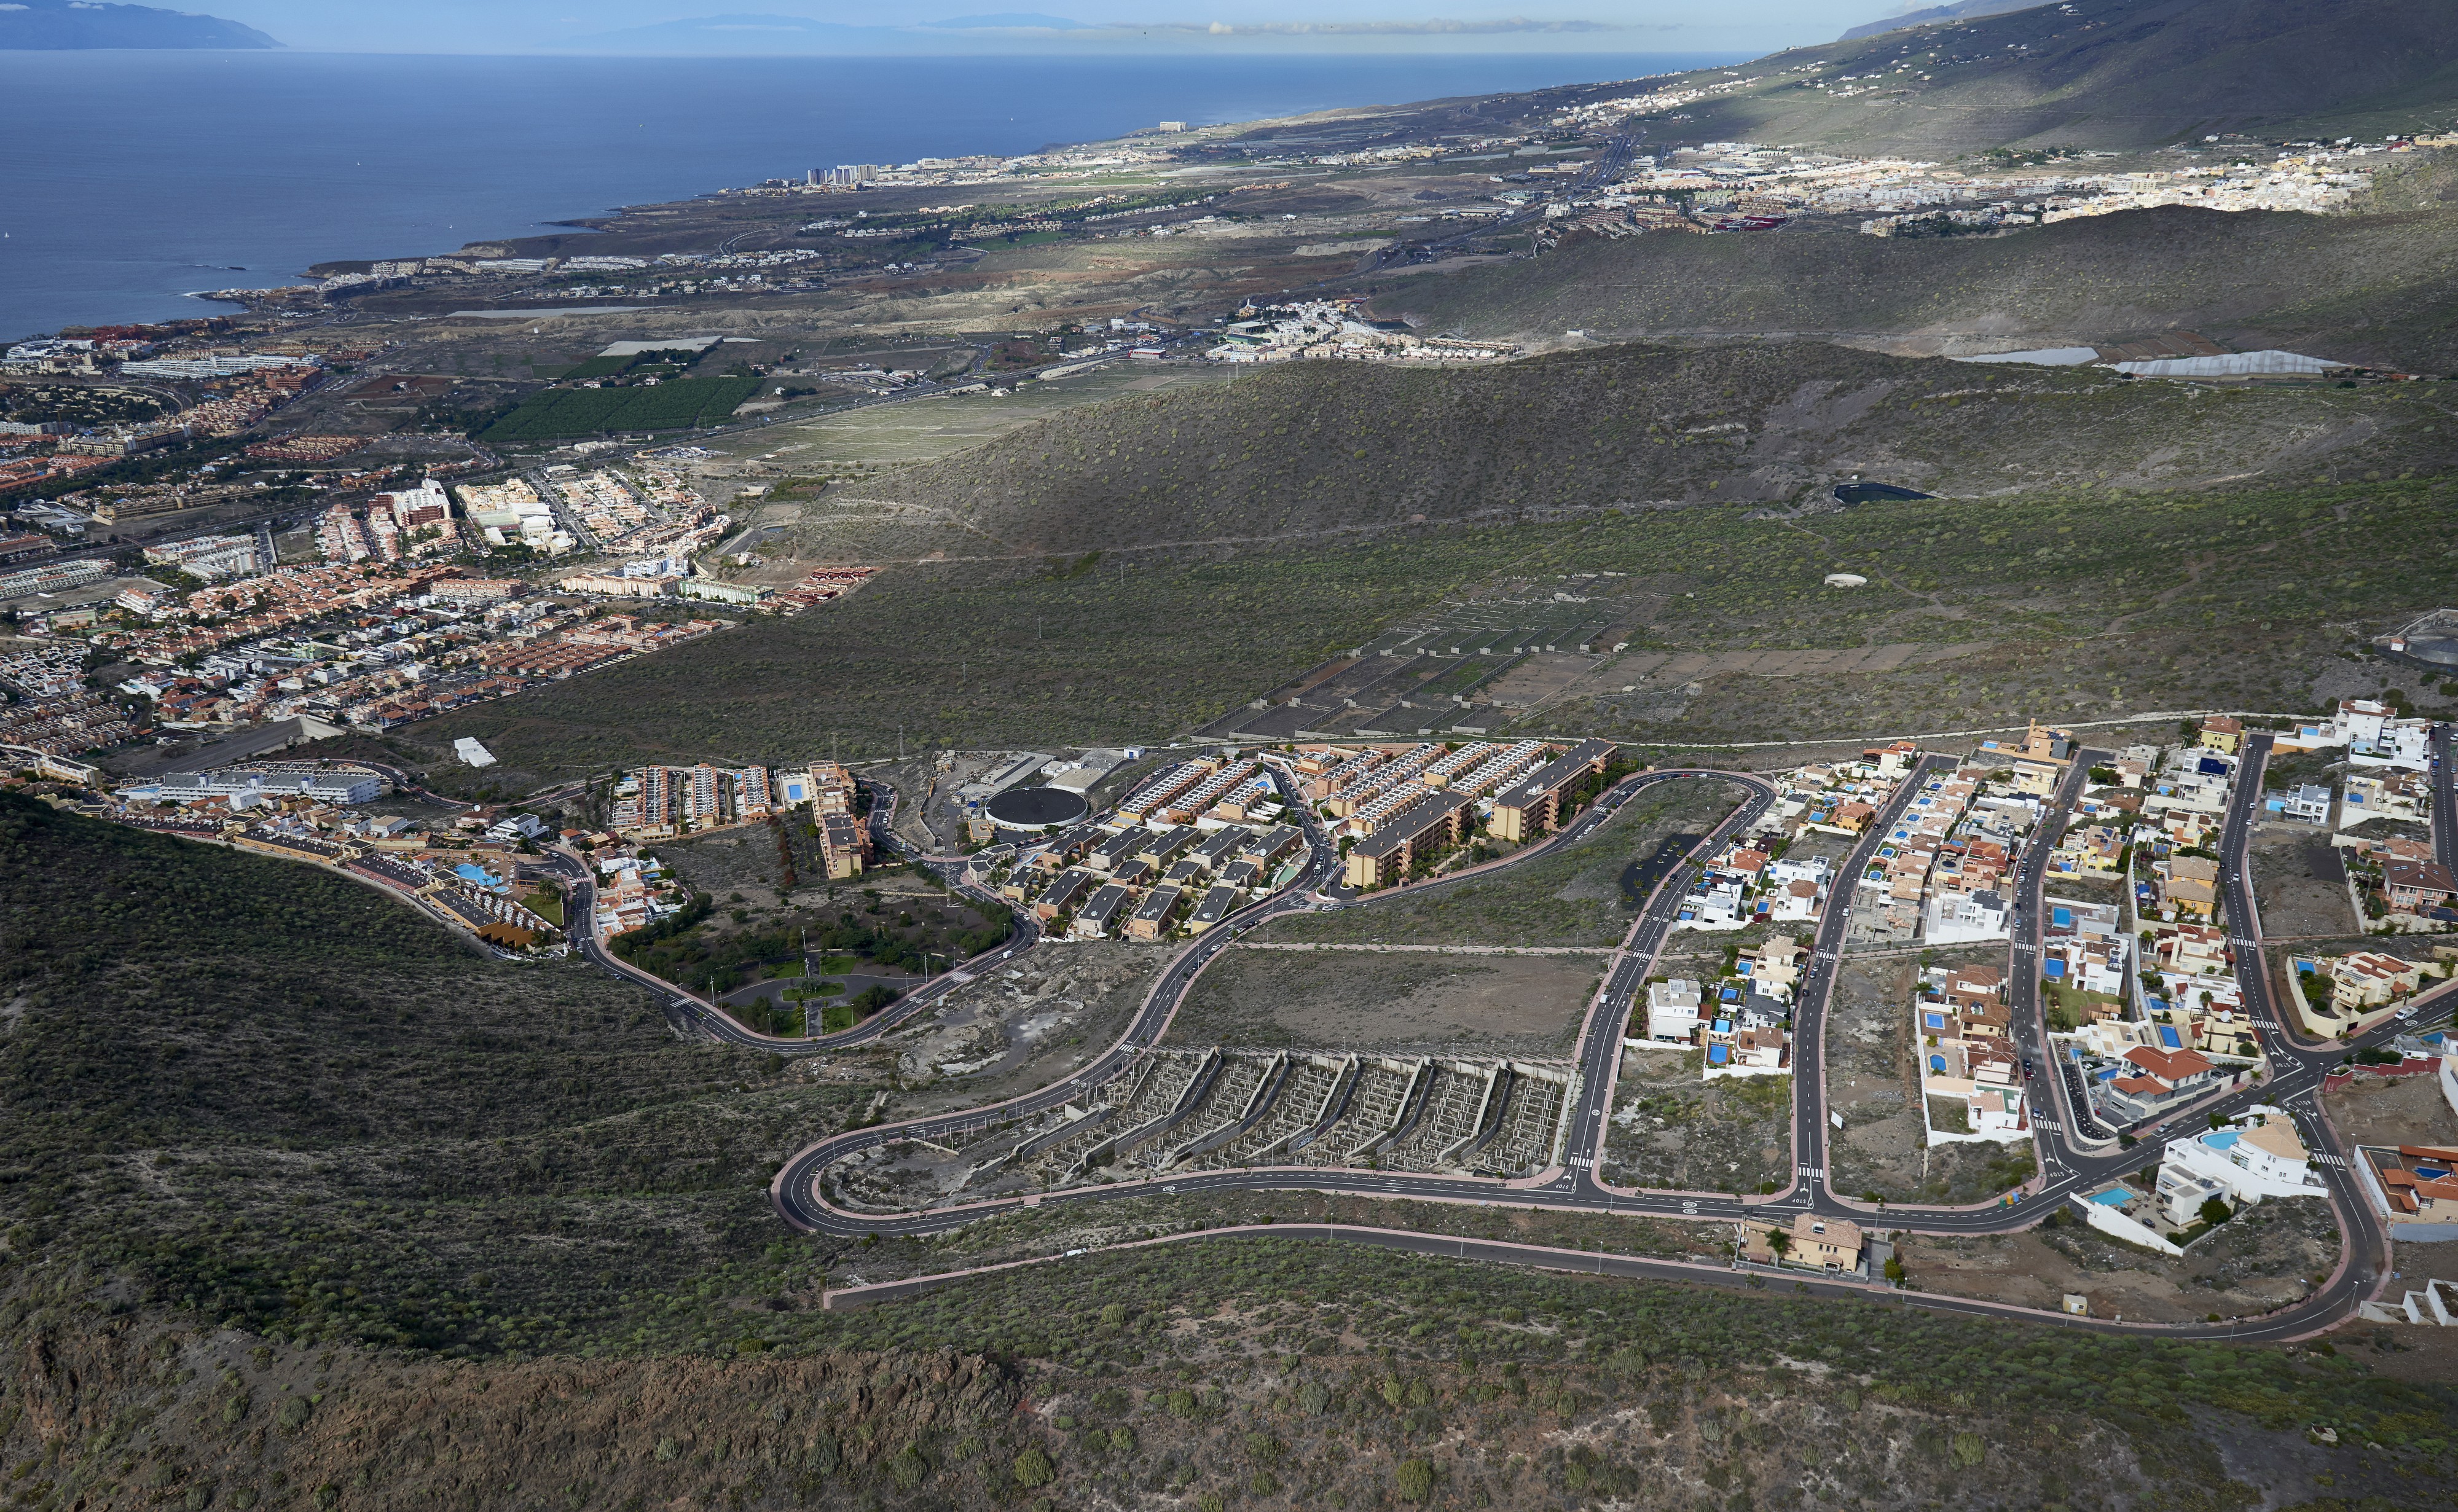 A0477 Tenerife, Adeje aerial view